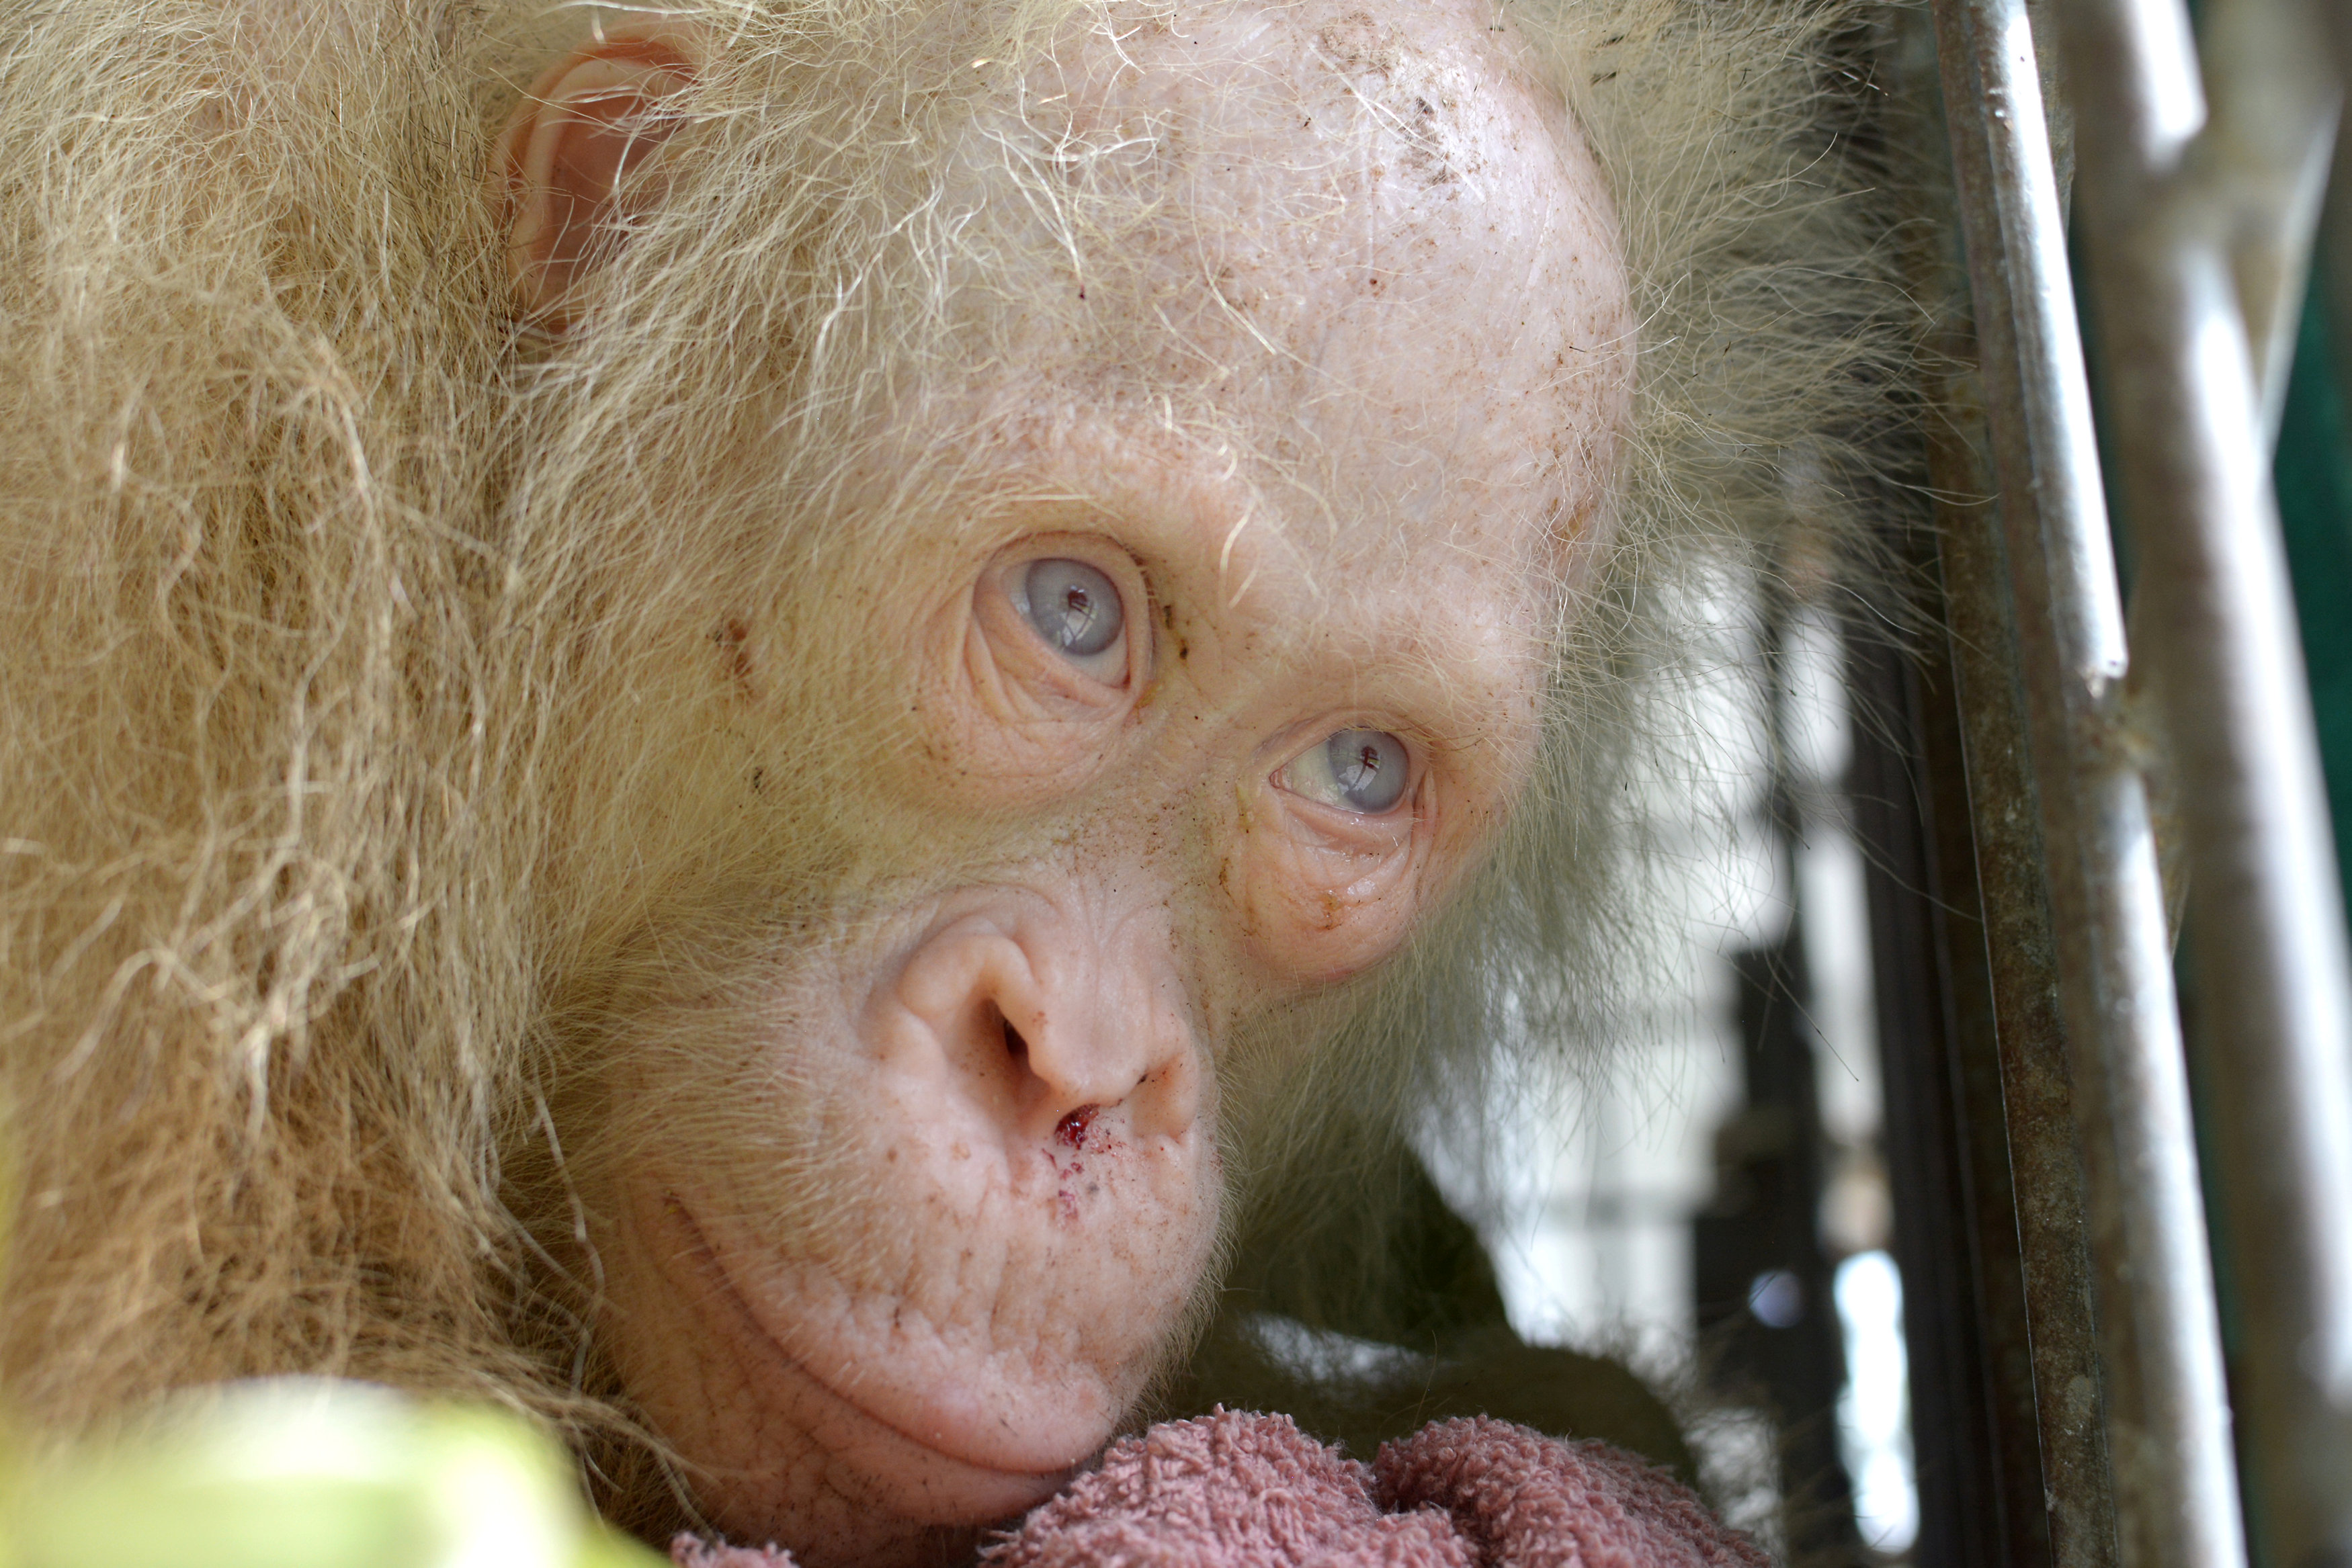 A rare 5 year-old female albino orangutan is seen after it was rescued from captivity by authorities in Kapuas Hulu district, Central Kalimantan province, Indonesia April 29, 2017 in this photo released by the wildlife conservation group Borneo Orangutan Survival Foundation (BOSF) . Picture taken April 29, 2017.   BOSF/Indrayana via REUTERS